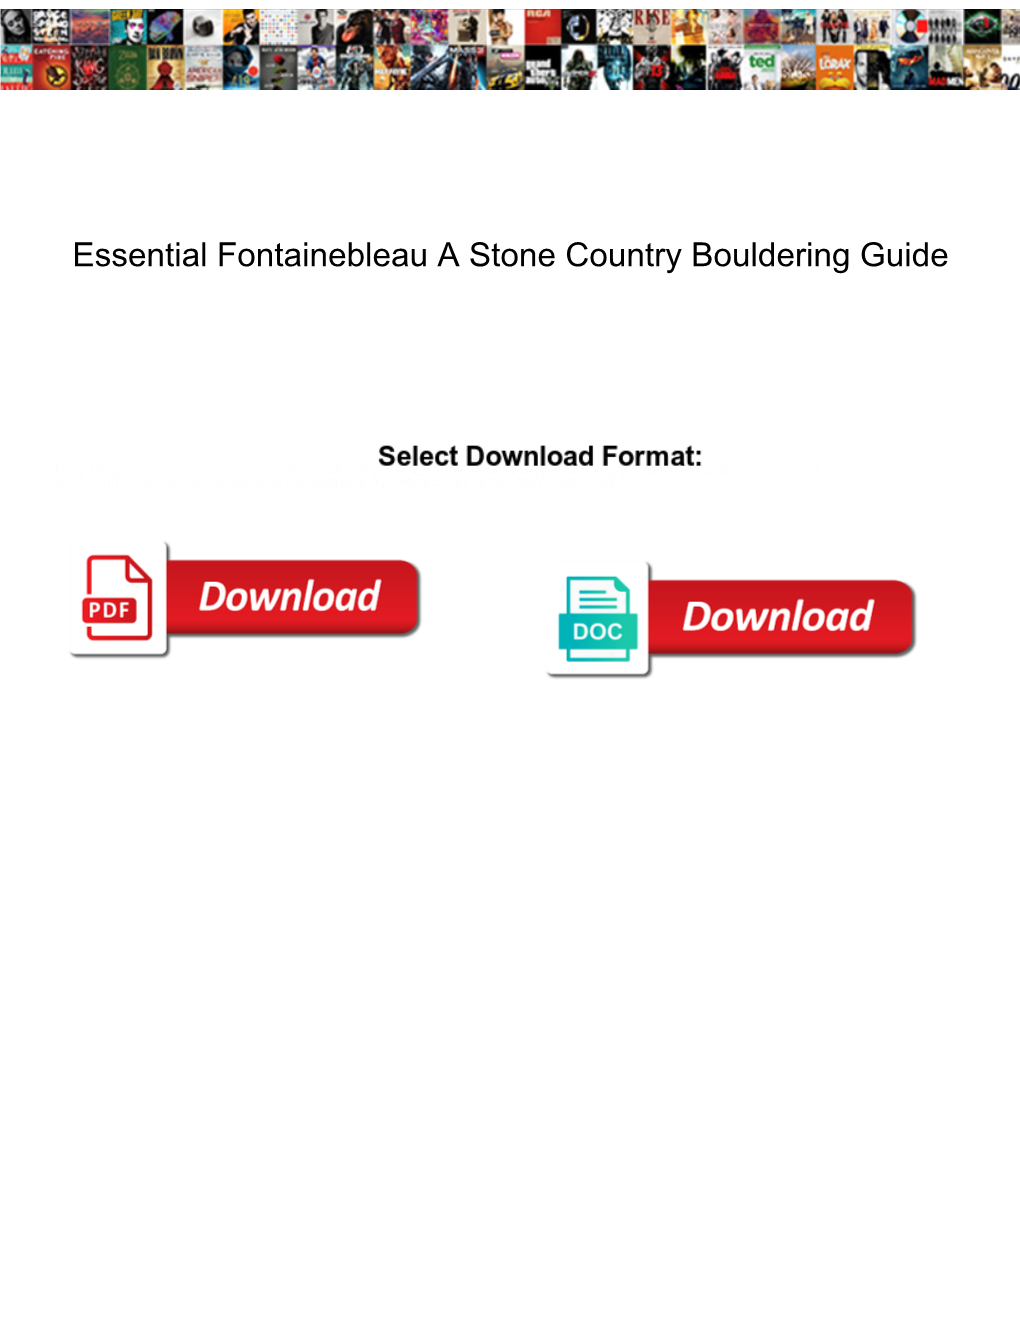 Essential Fontainebleau a Stone Country Bouldering Guide Scott